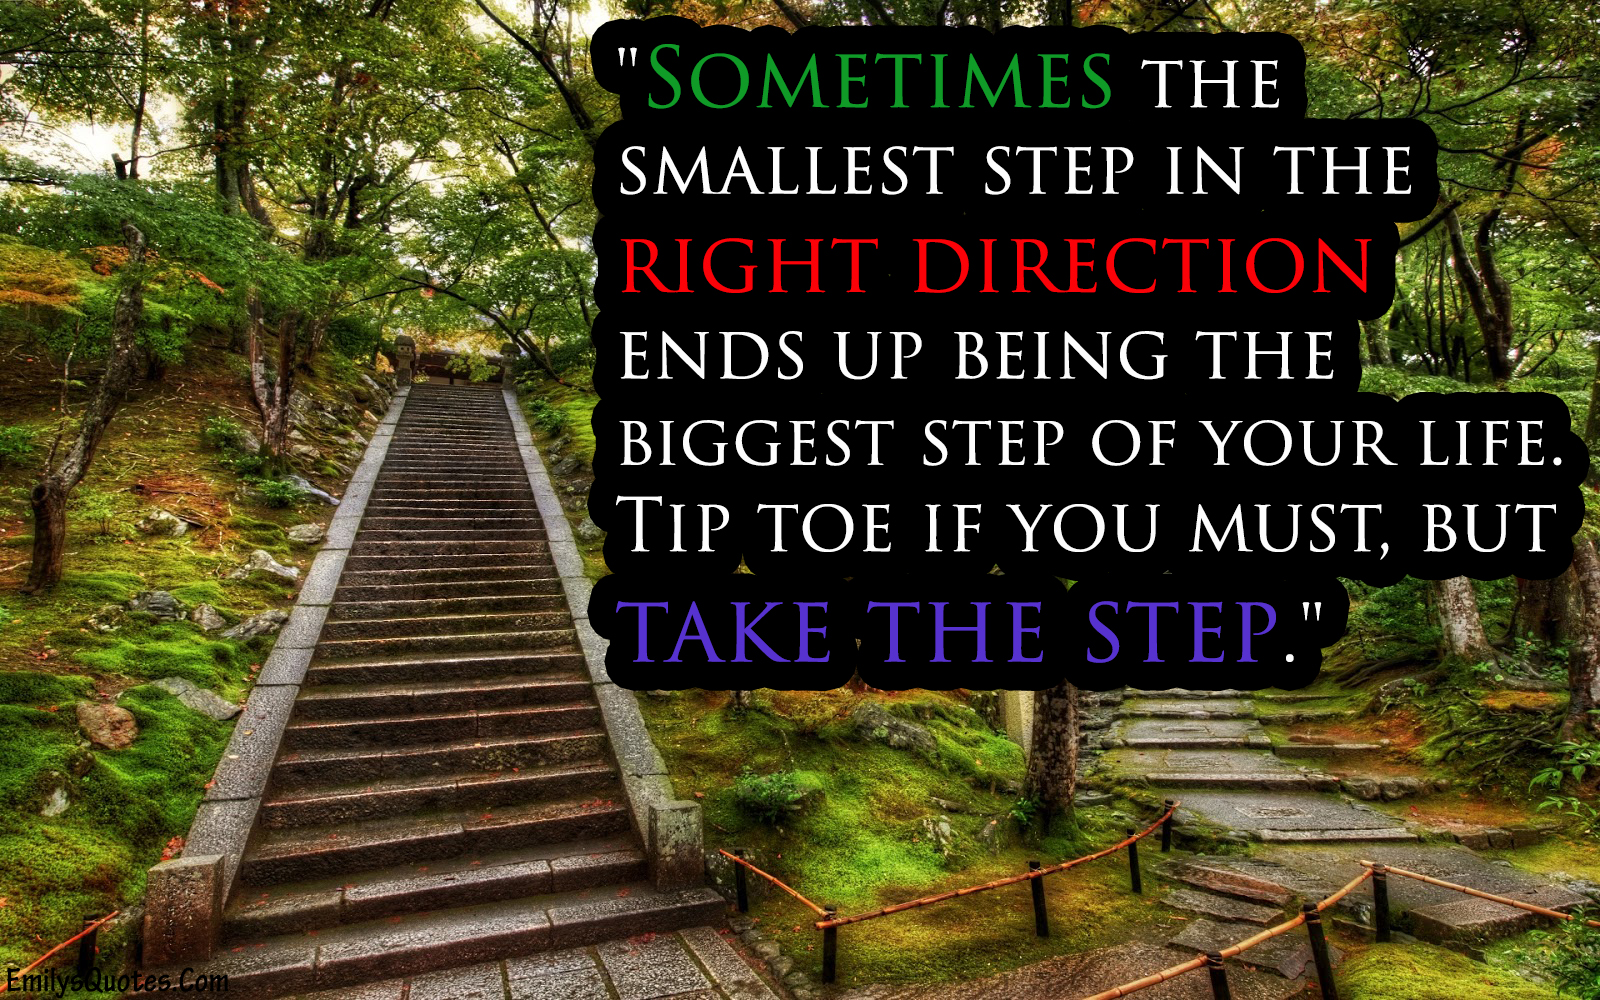 Sometimes the smallest step in the right direction ends up being the